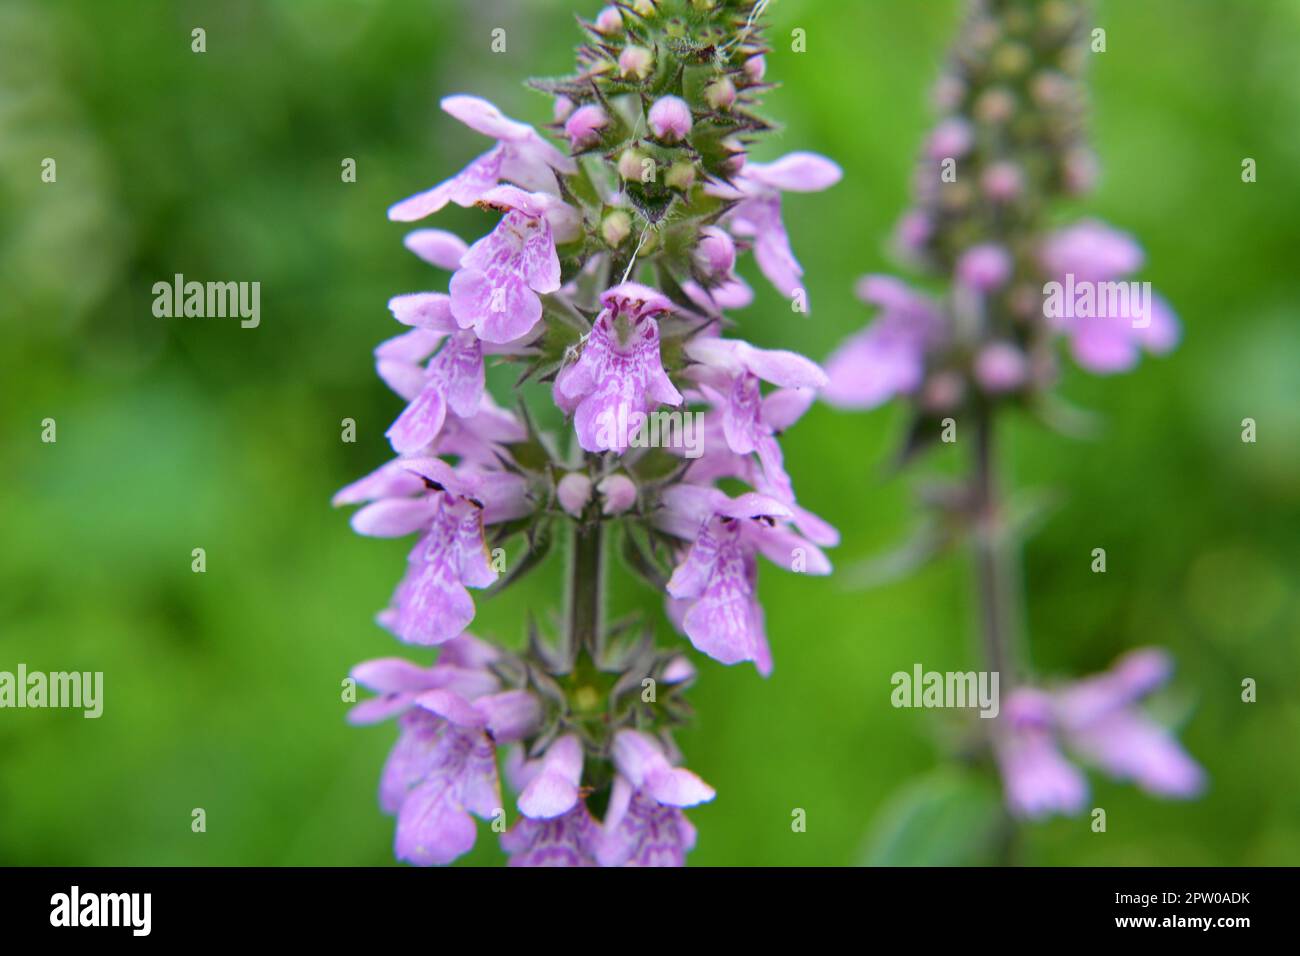 Stachys palustris grows among grasses in the wild Stock Photo